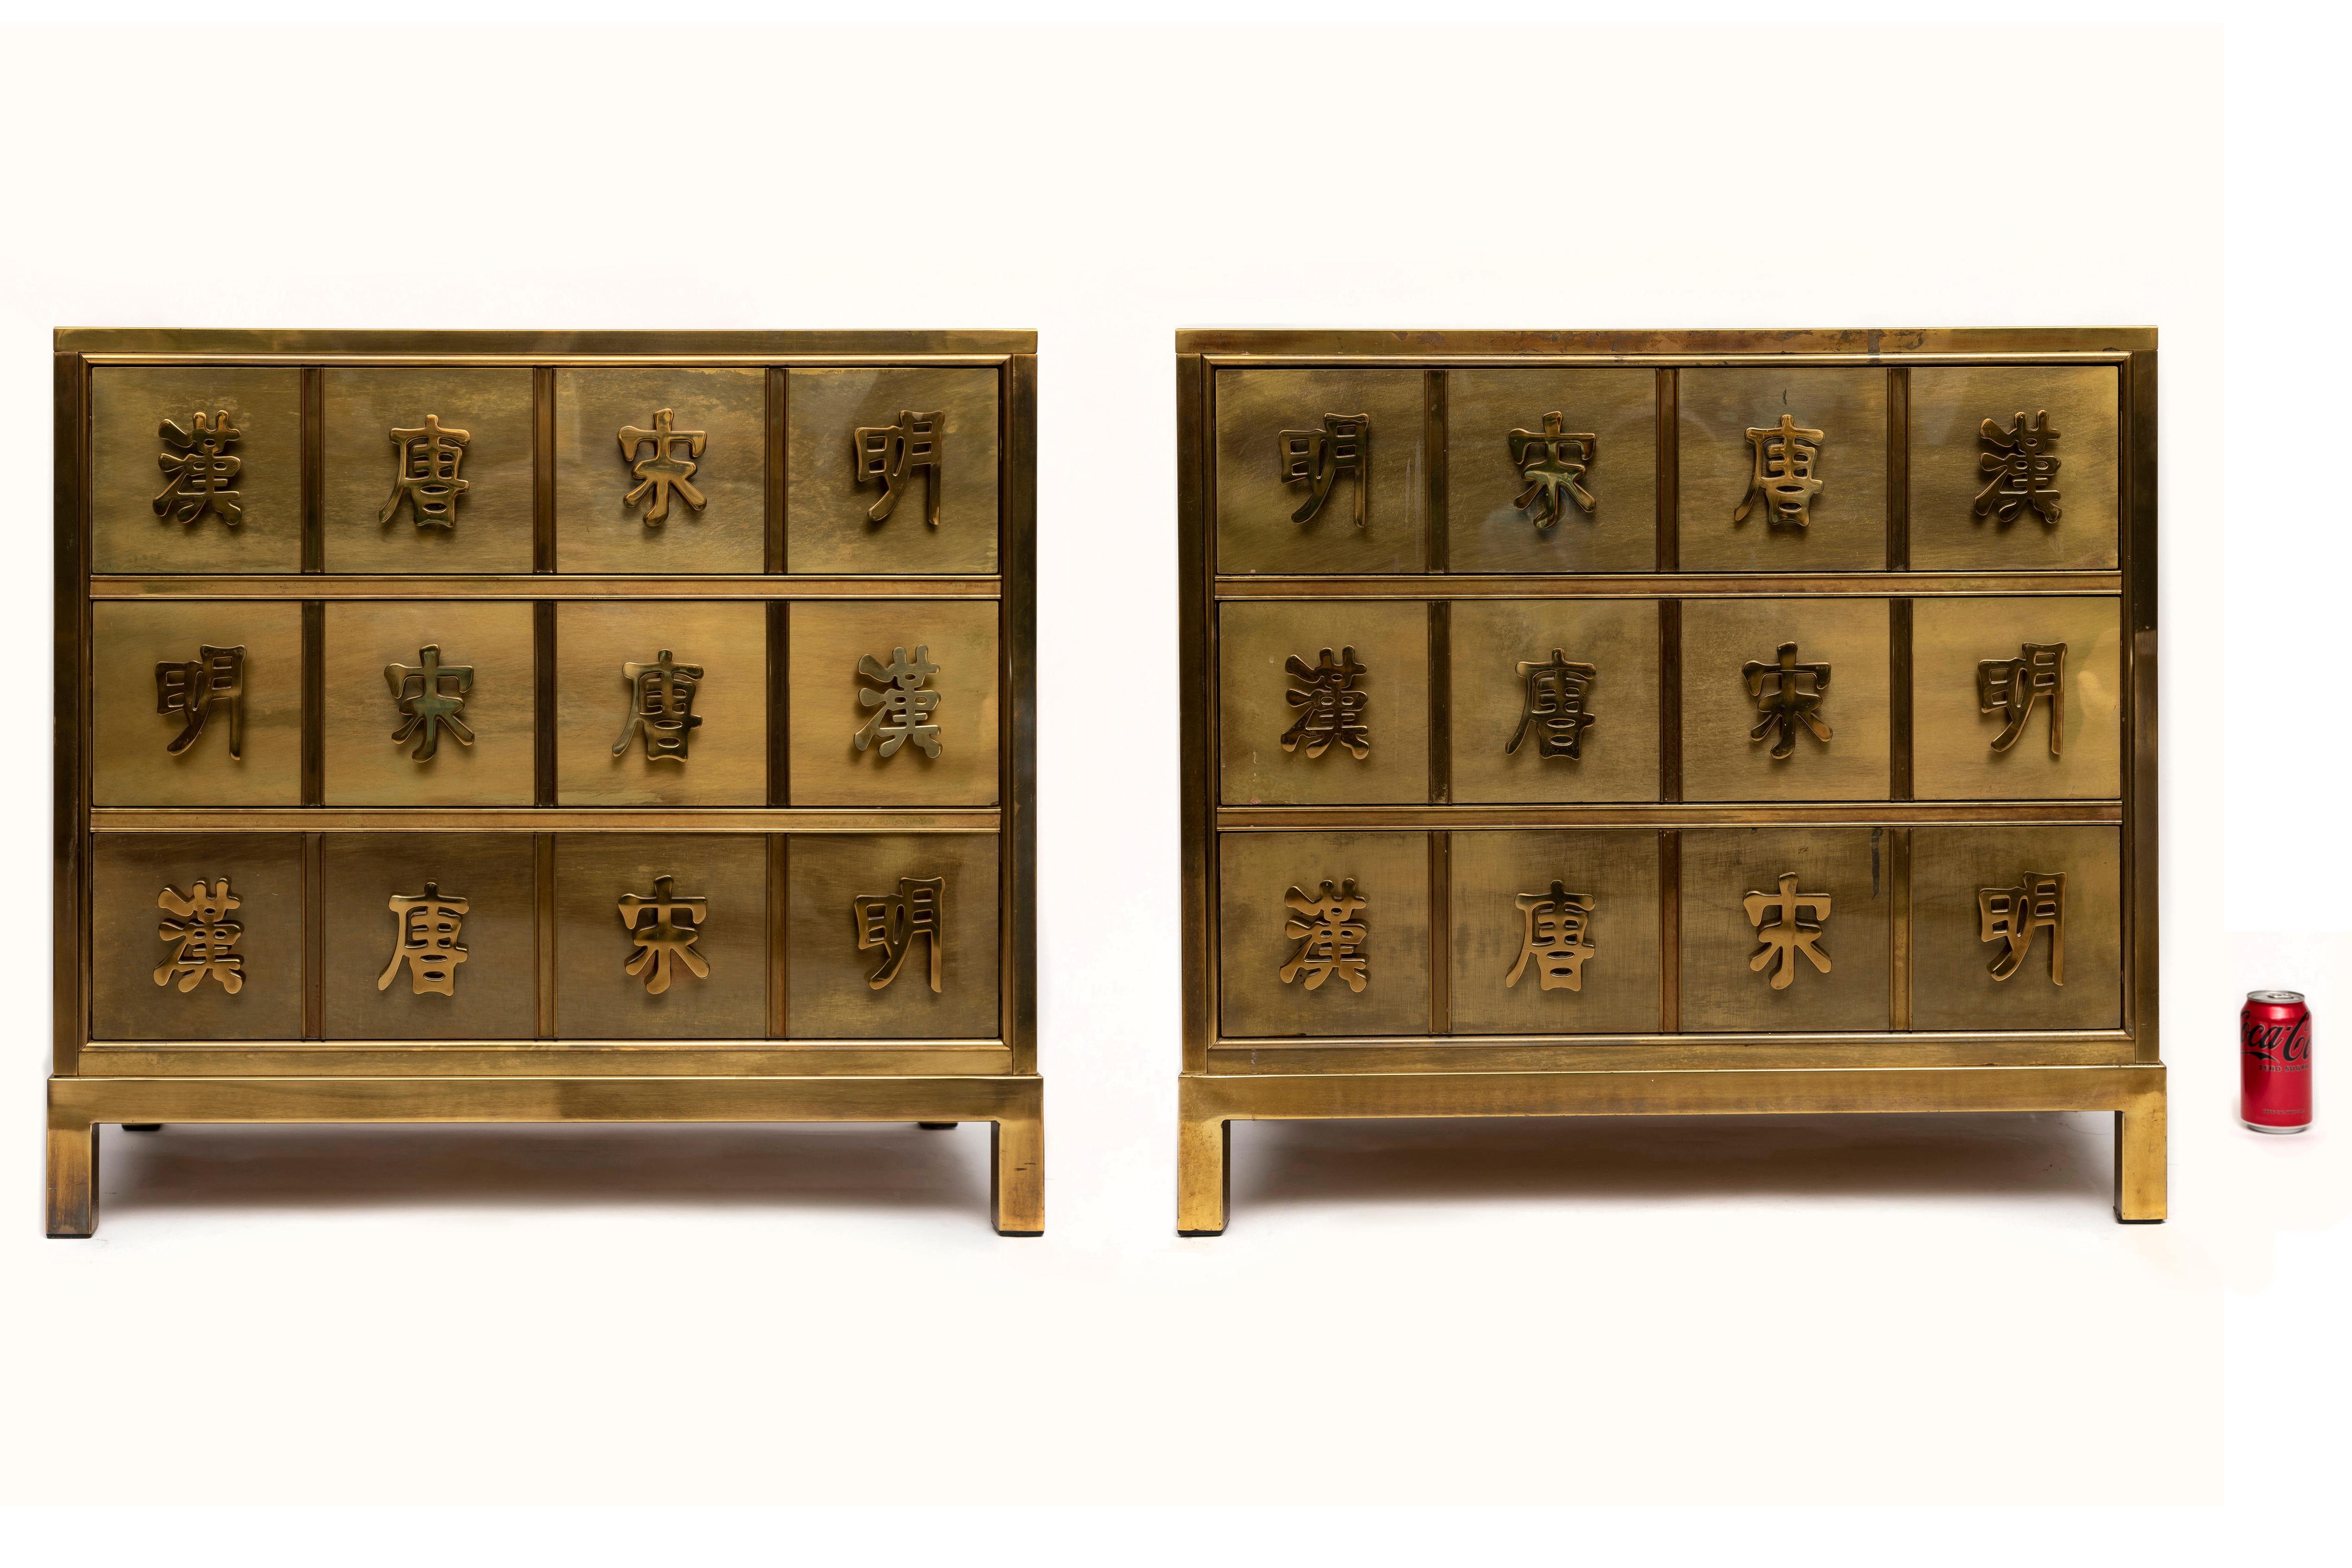 A Fabulous Pair of Chinoiserie Commodes with Chinese Character Handles, Mastercraft.  Hollywood Cinema’s Golden Era remains one of the most prominent influences across contemporary art and culture worldwide. Born in California in the 1920s, the